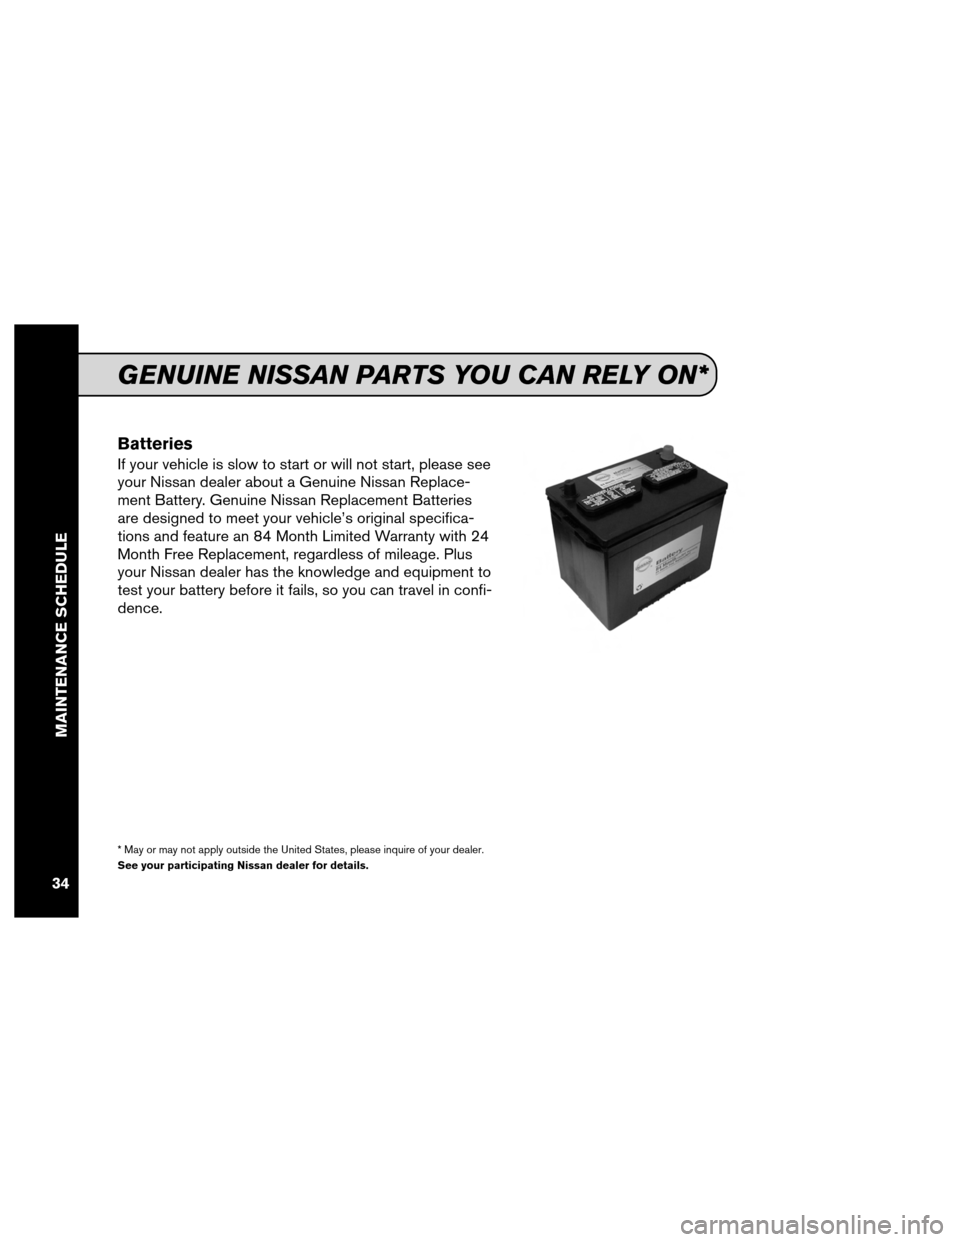 NISSAN XTERRA 2012 N50 / 2.G Service And Maintenance Guide Batteries
If your vehicle is slow to start or will not start, please see
your Nissan dealer about a Genuine Nissan Replace-
ment Battery. Genuine Nissan Replacement Batteries
are designed to meet your